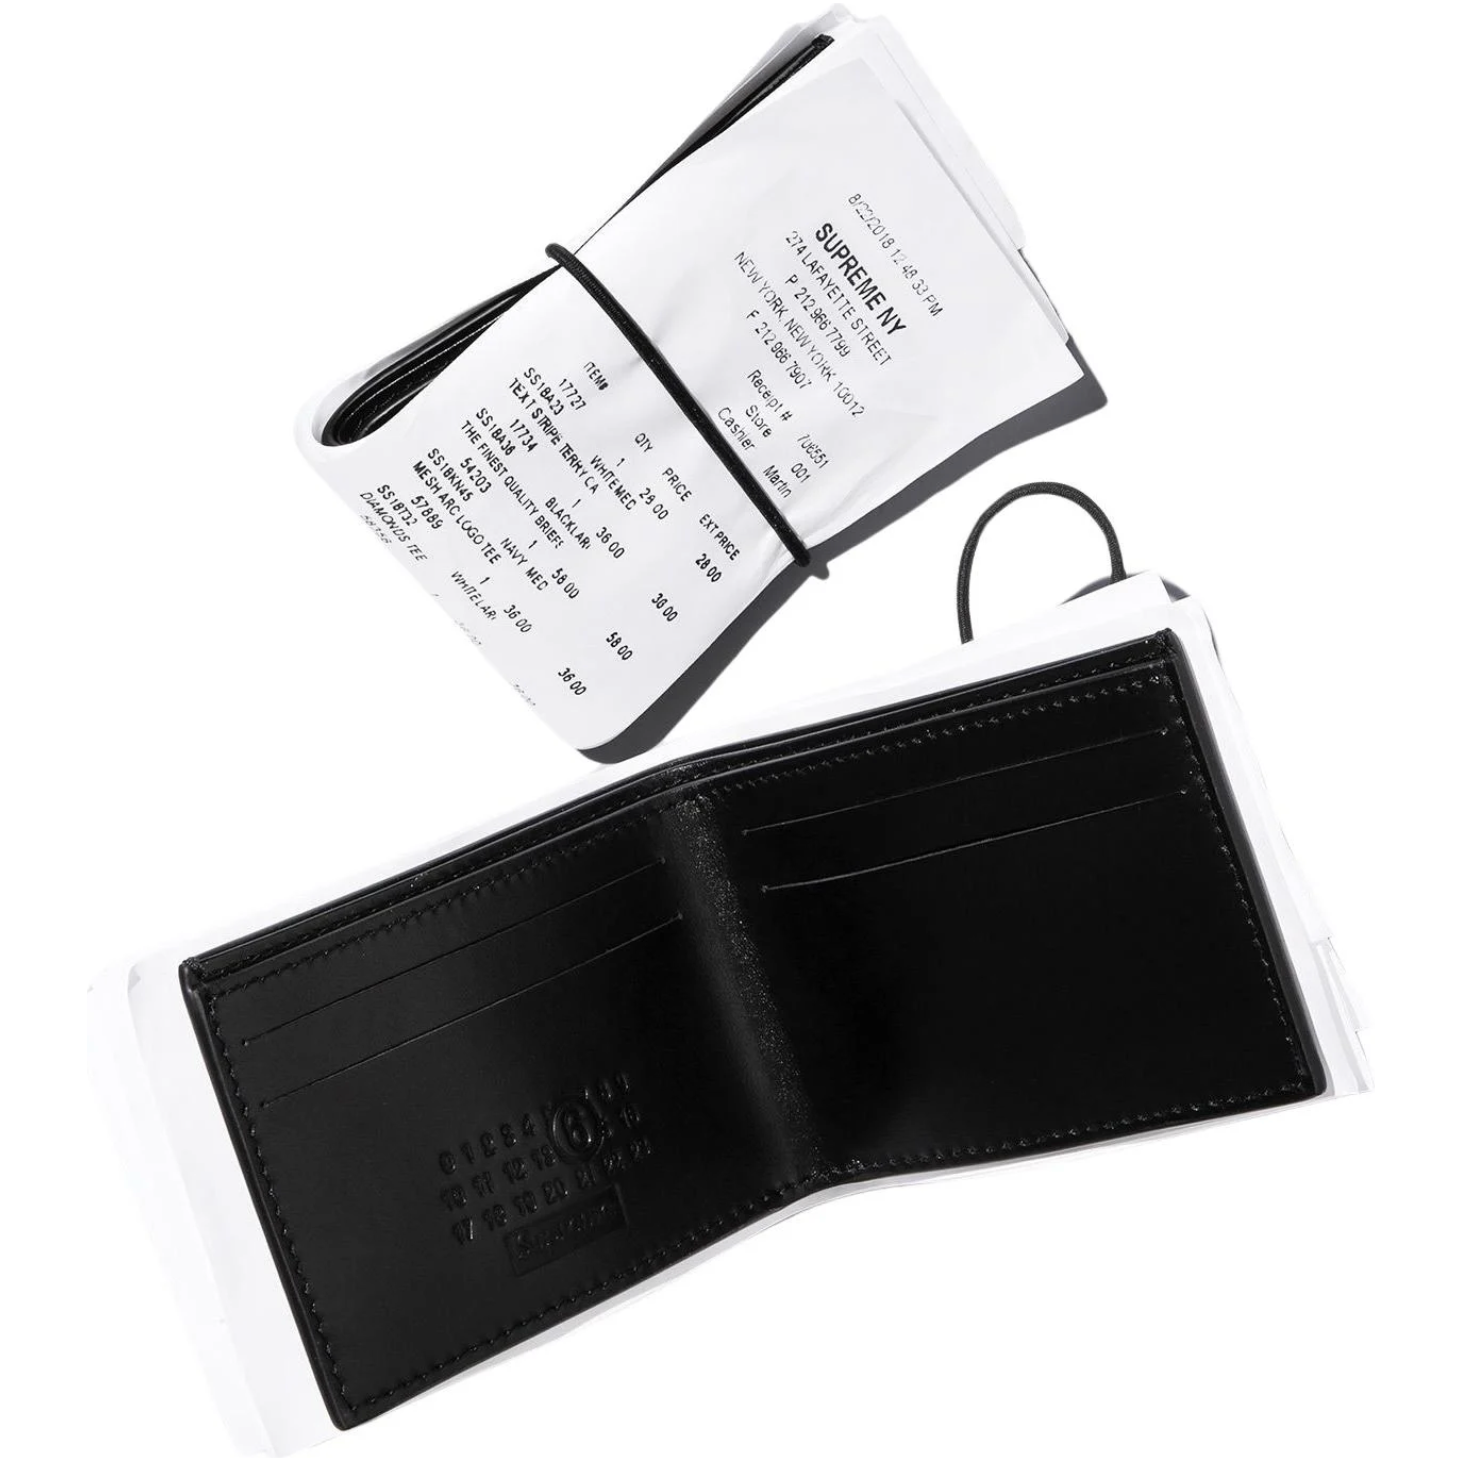 SUPREME/MM6 MAISON MARGIELA RECEIPT WALLET by Supreme from £500.00